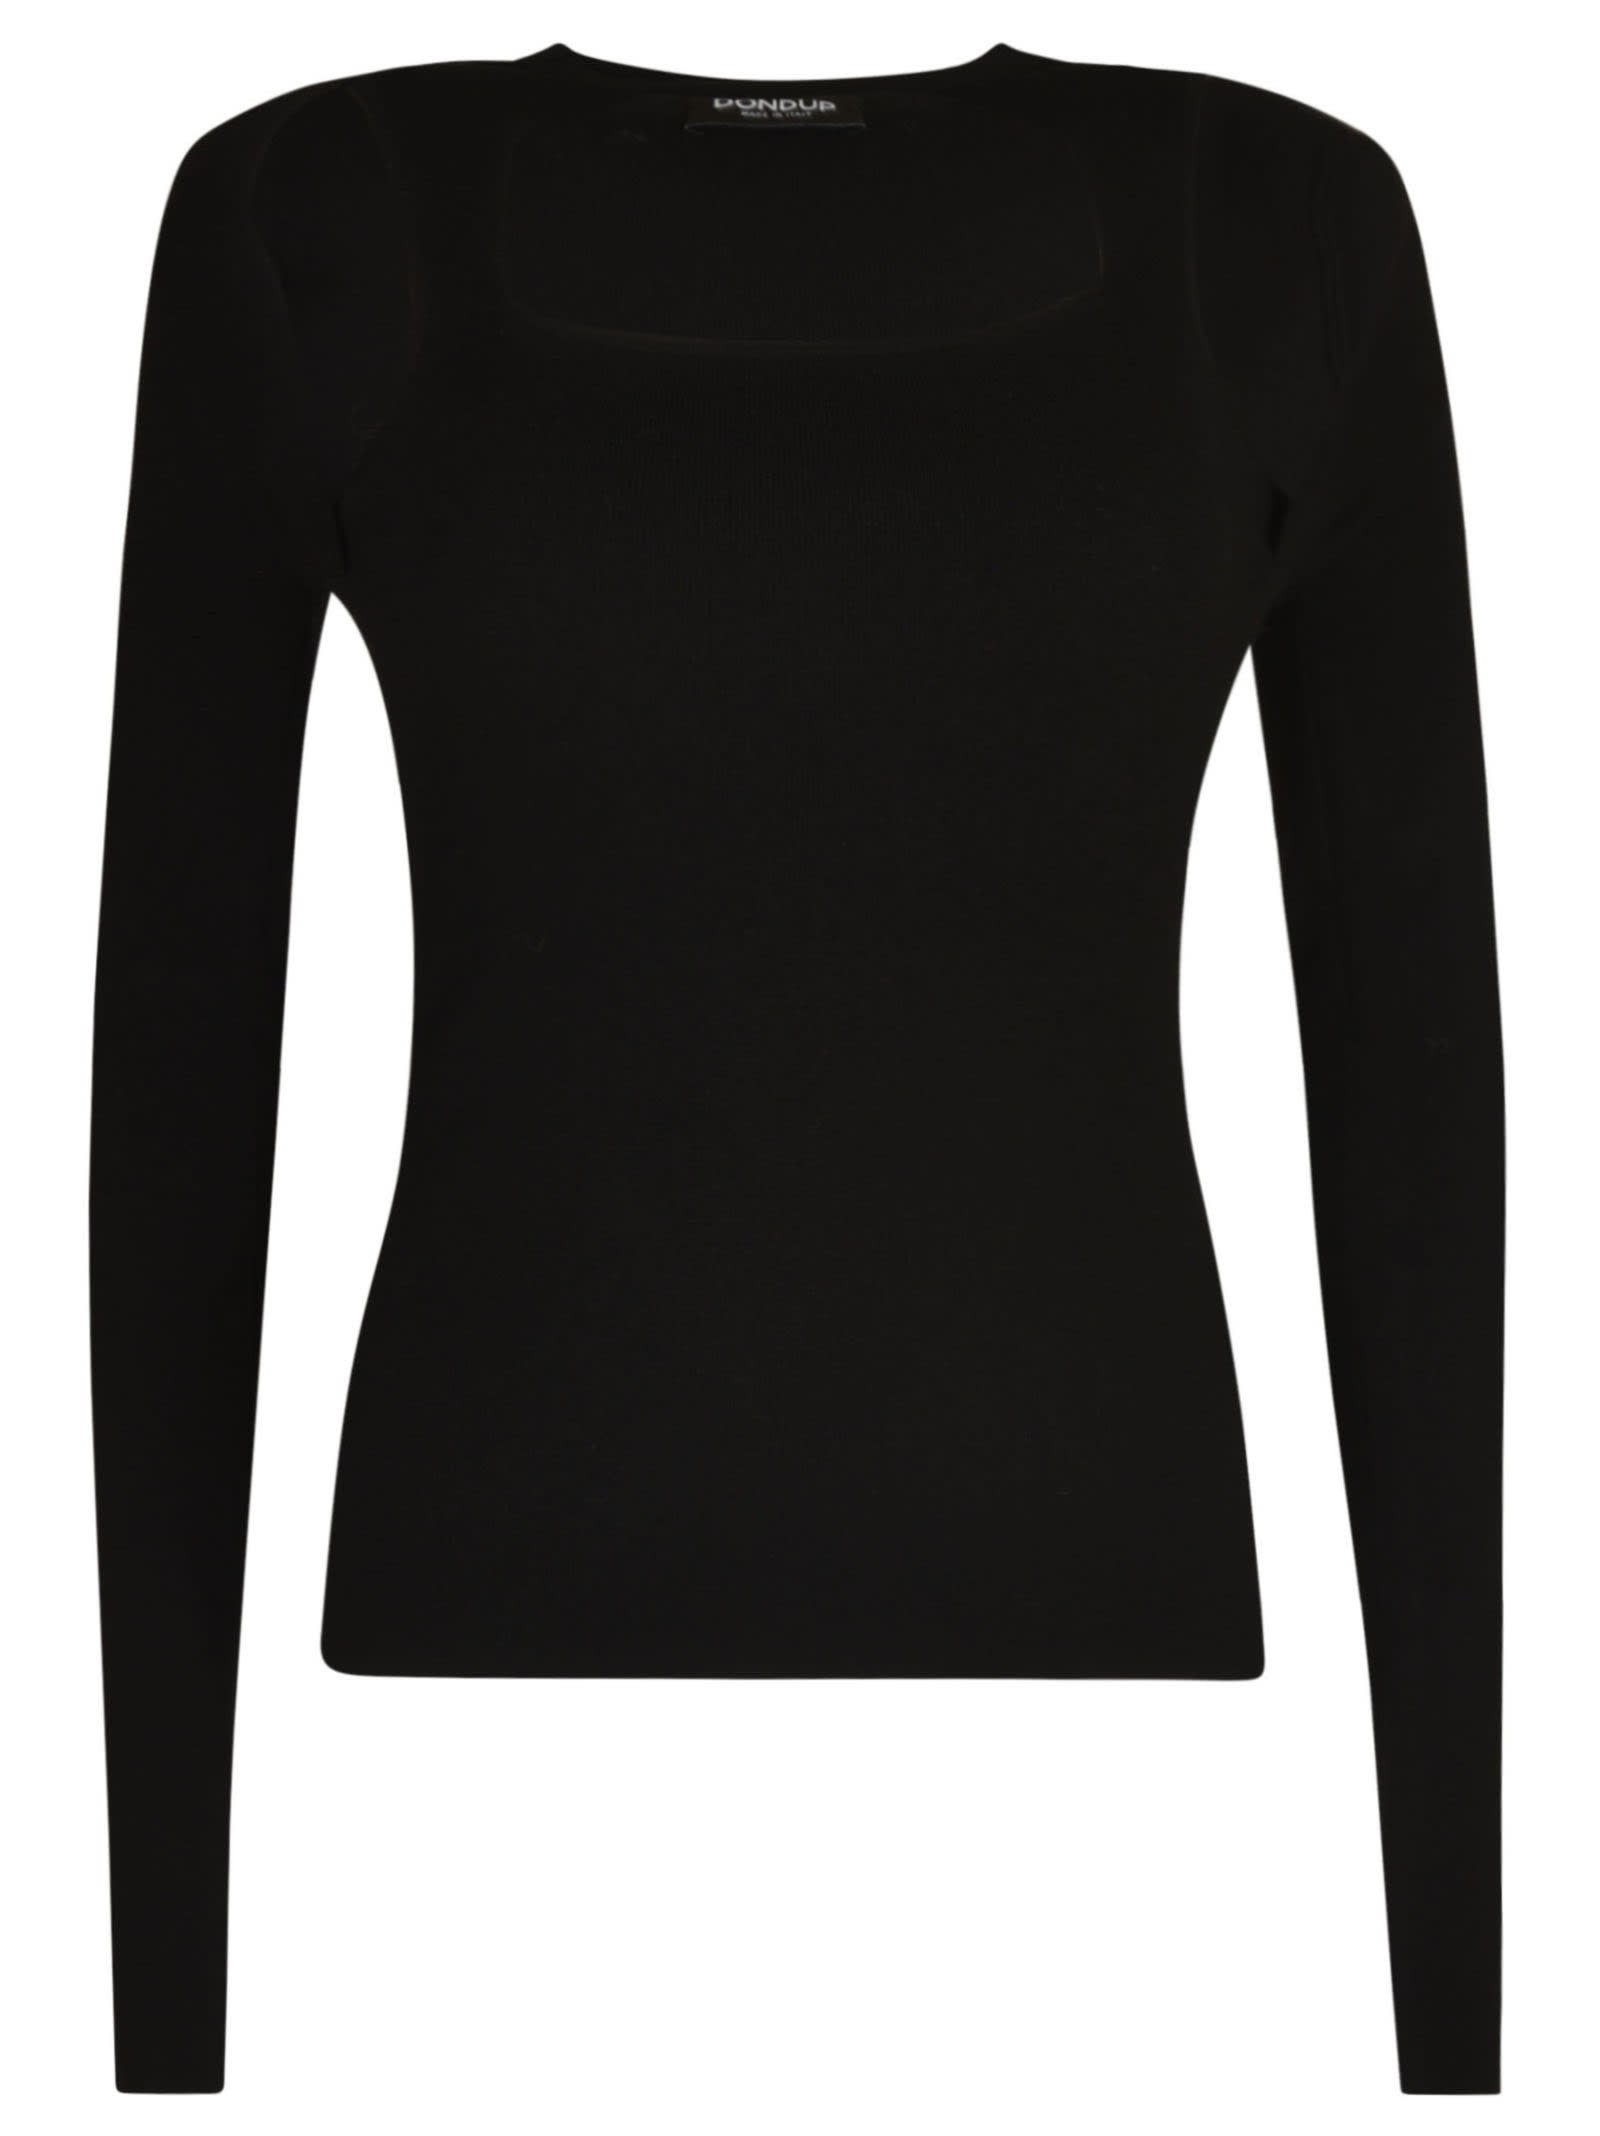 Cut-out Detail Square-neck Pullover